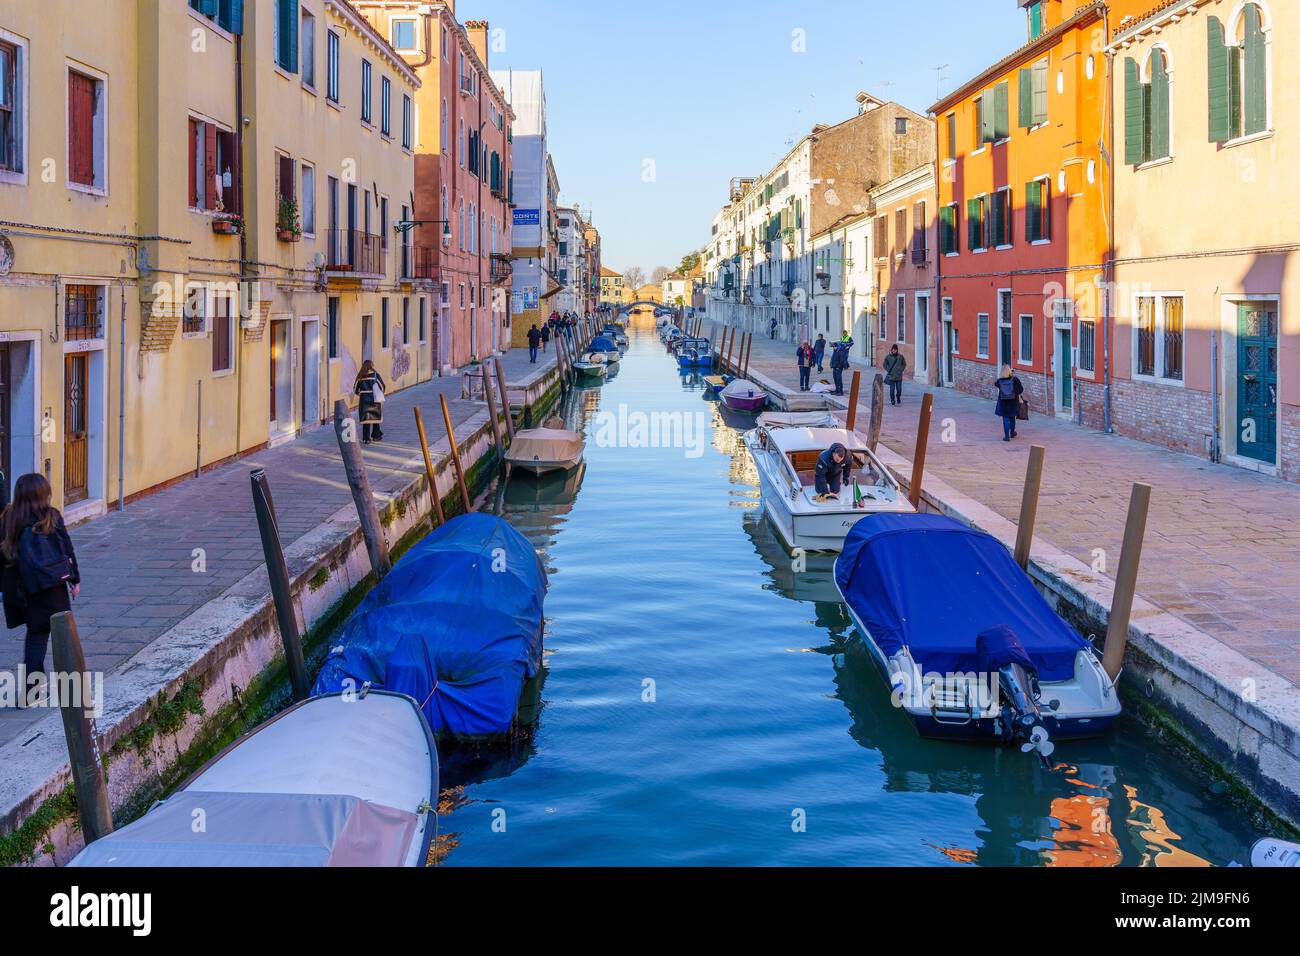 Venice, Italy - March 01, 2022: View of Canal, with colorful buildings, bridges, boats, locals, and visitors, in Venice, Veneto, Northern Italy Stock Photo